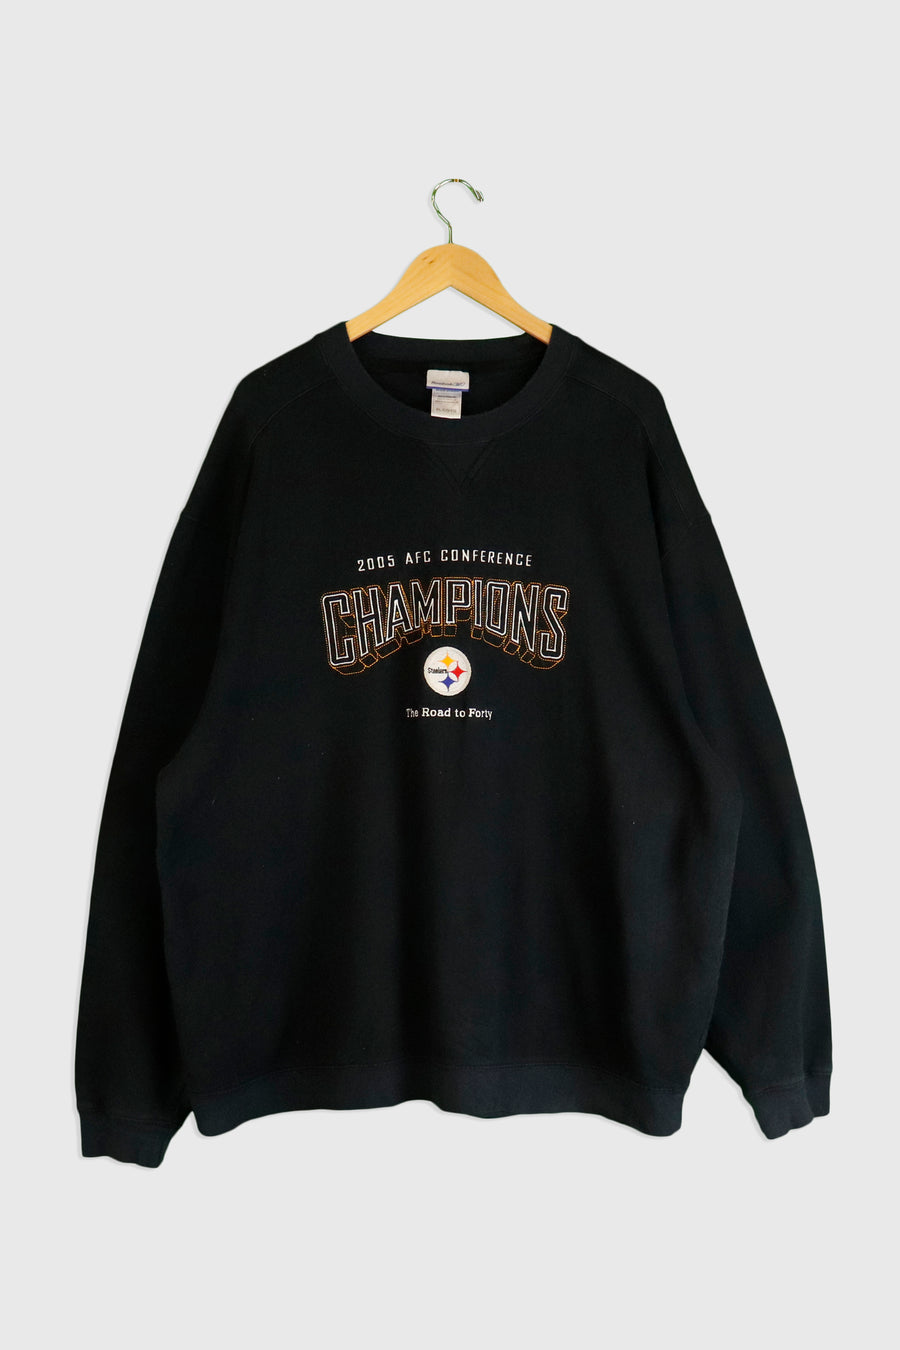 Vintage 2005 Steelers The Road To Forty Sweatshirt Sz XL